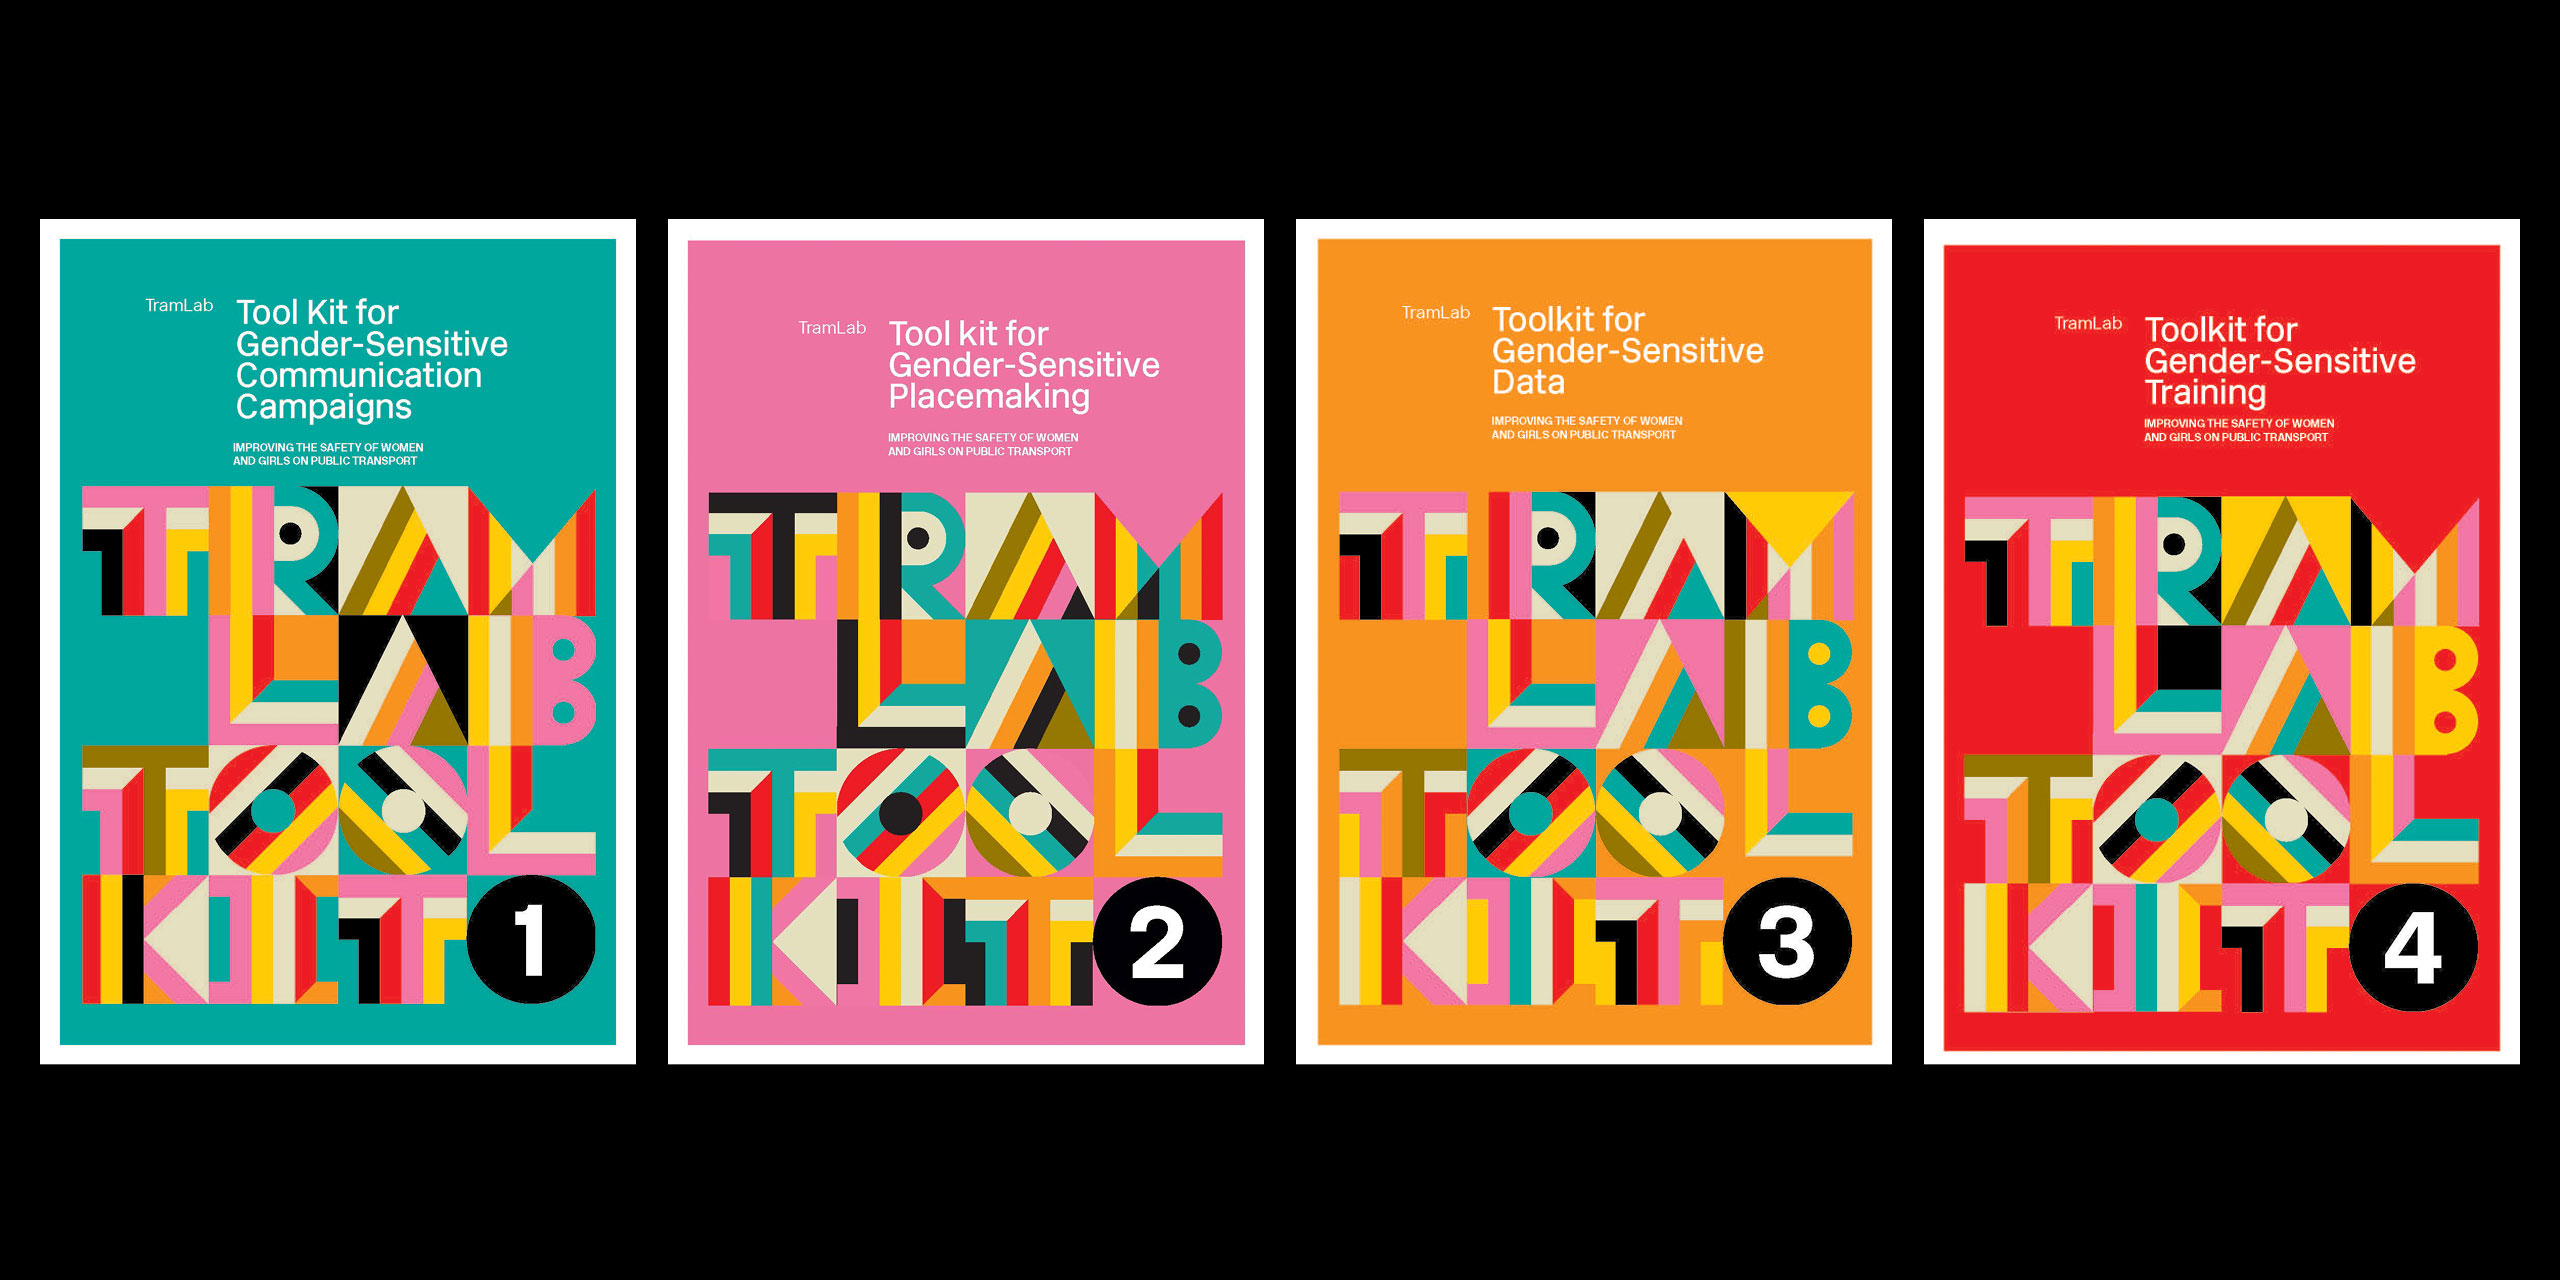 The four TramLab Toolkits